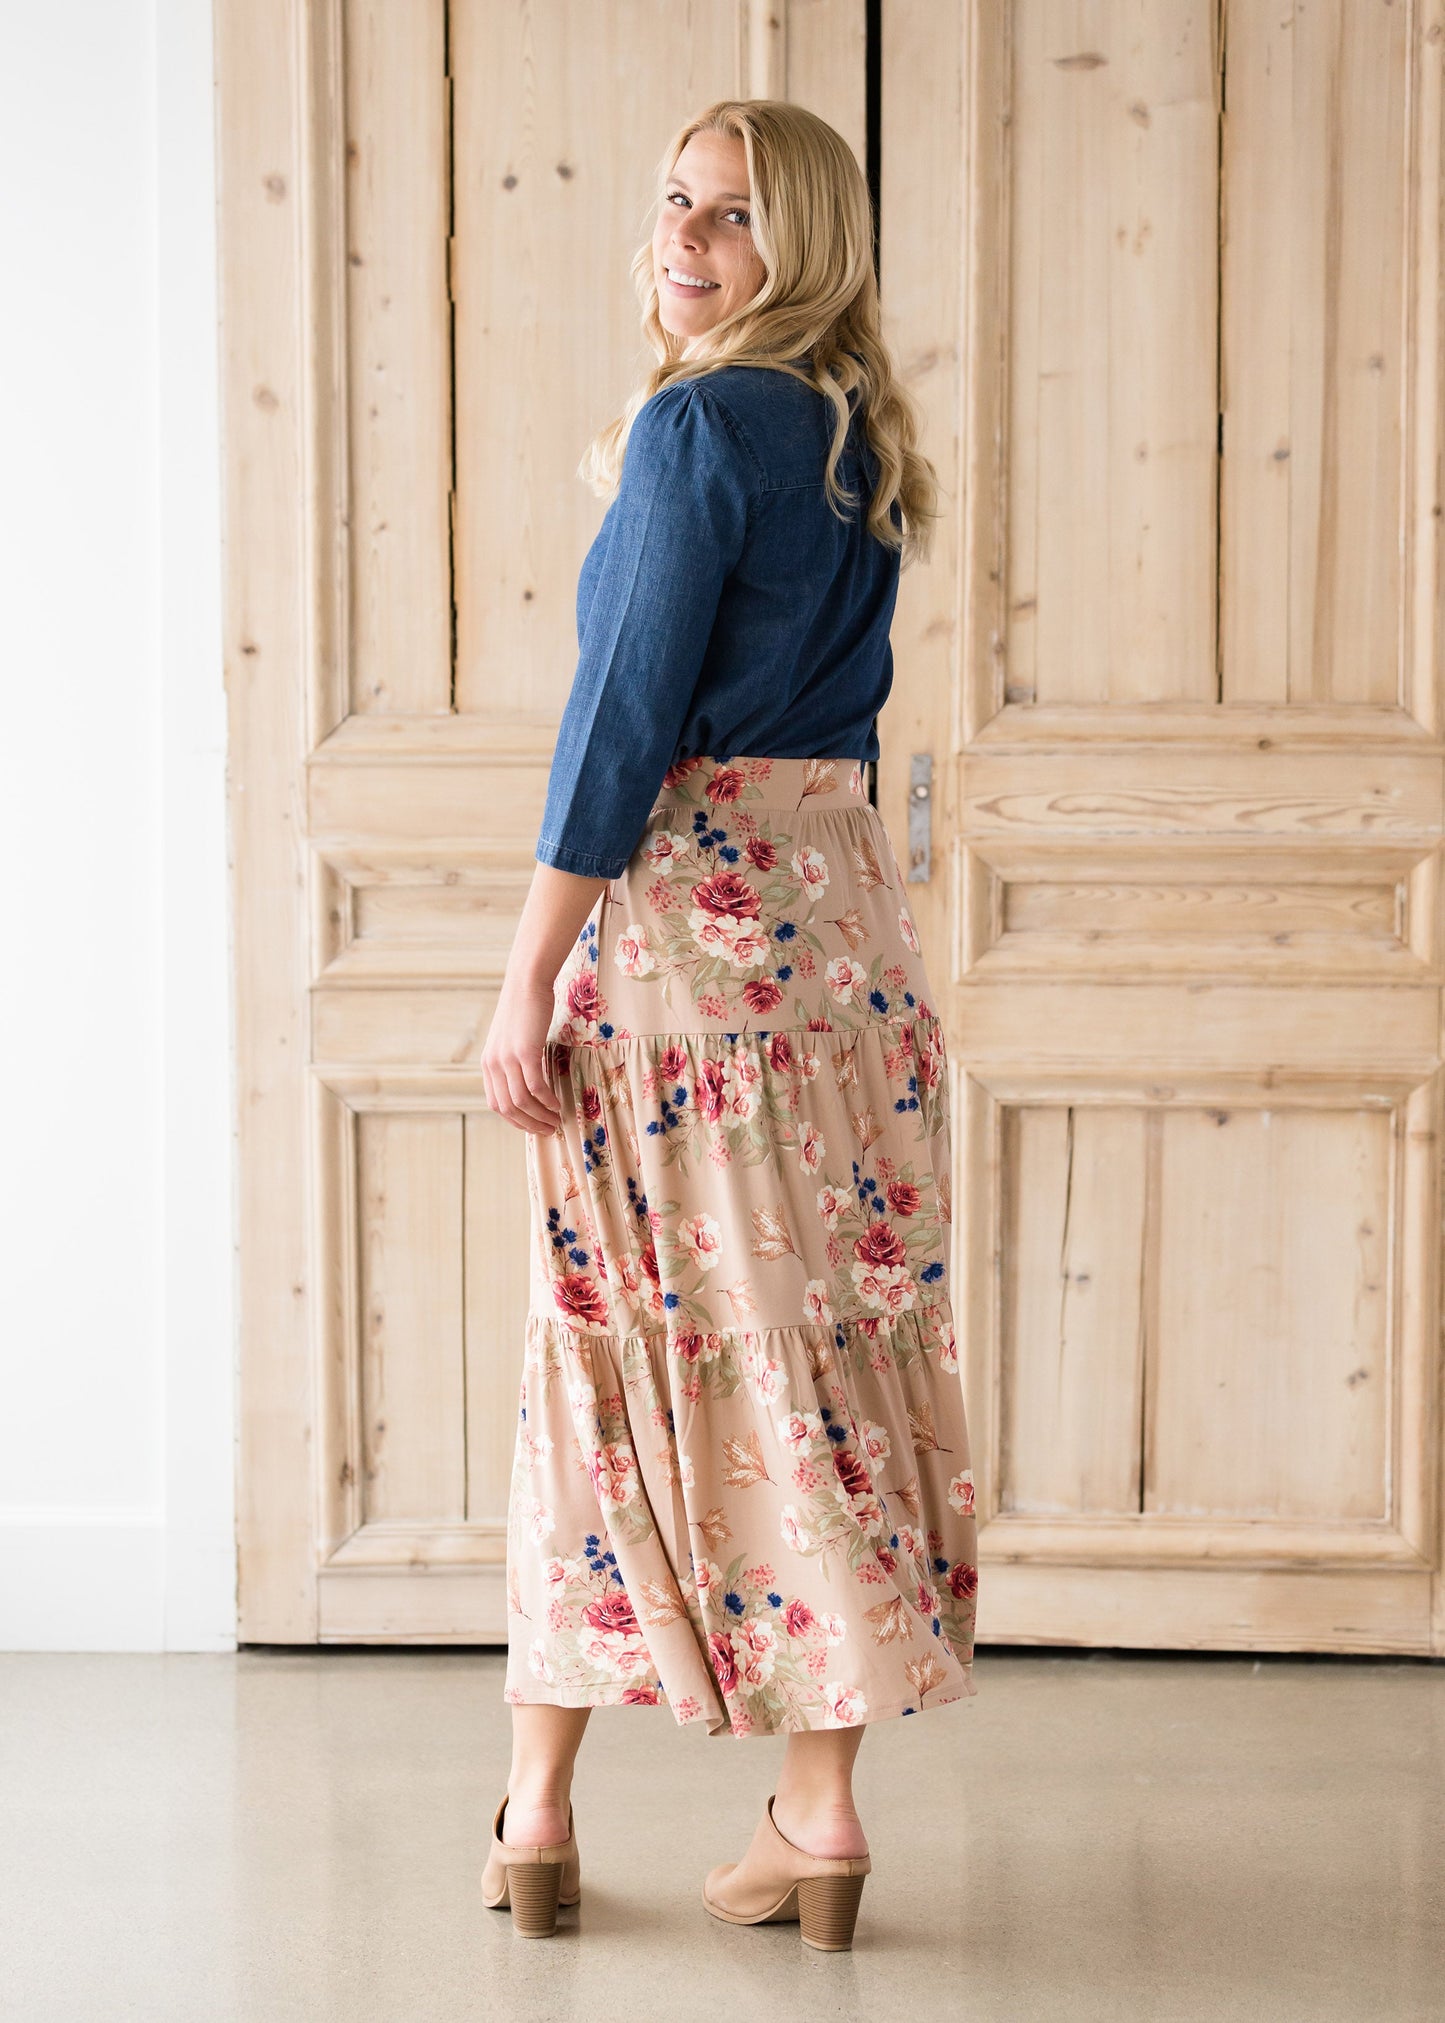 Floral Layered Stretch Maxi Skirt - FINAL SALE Skirts